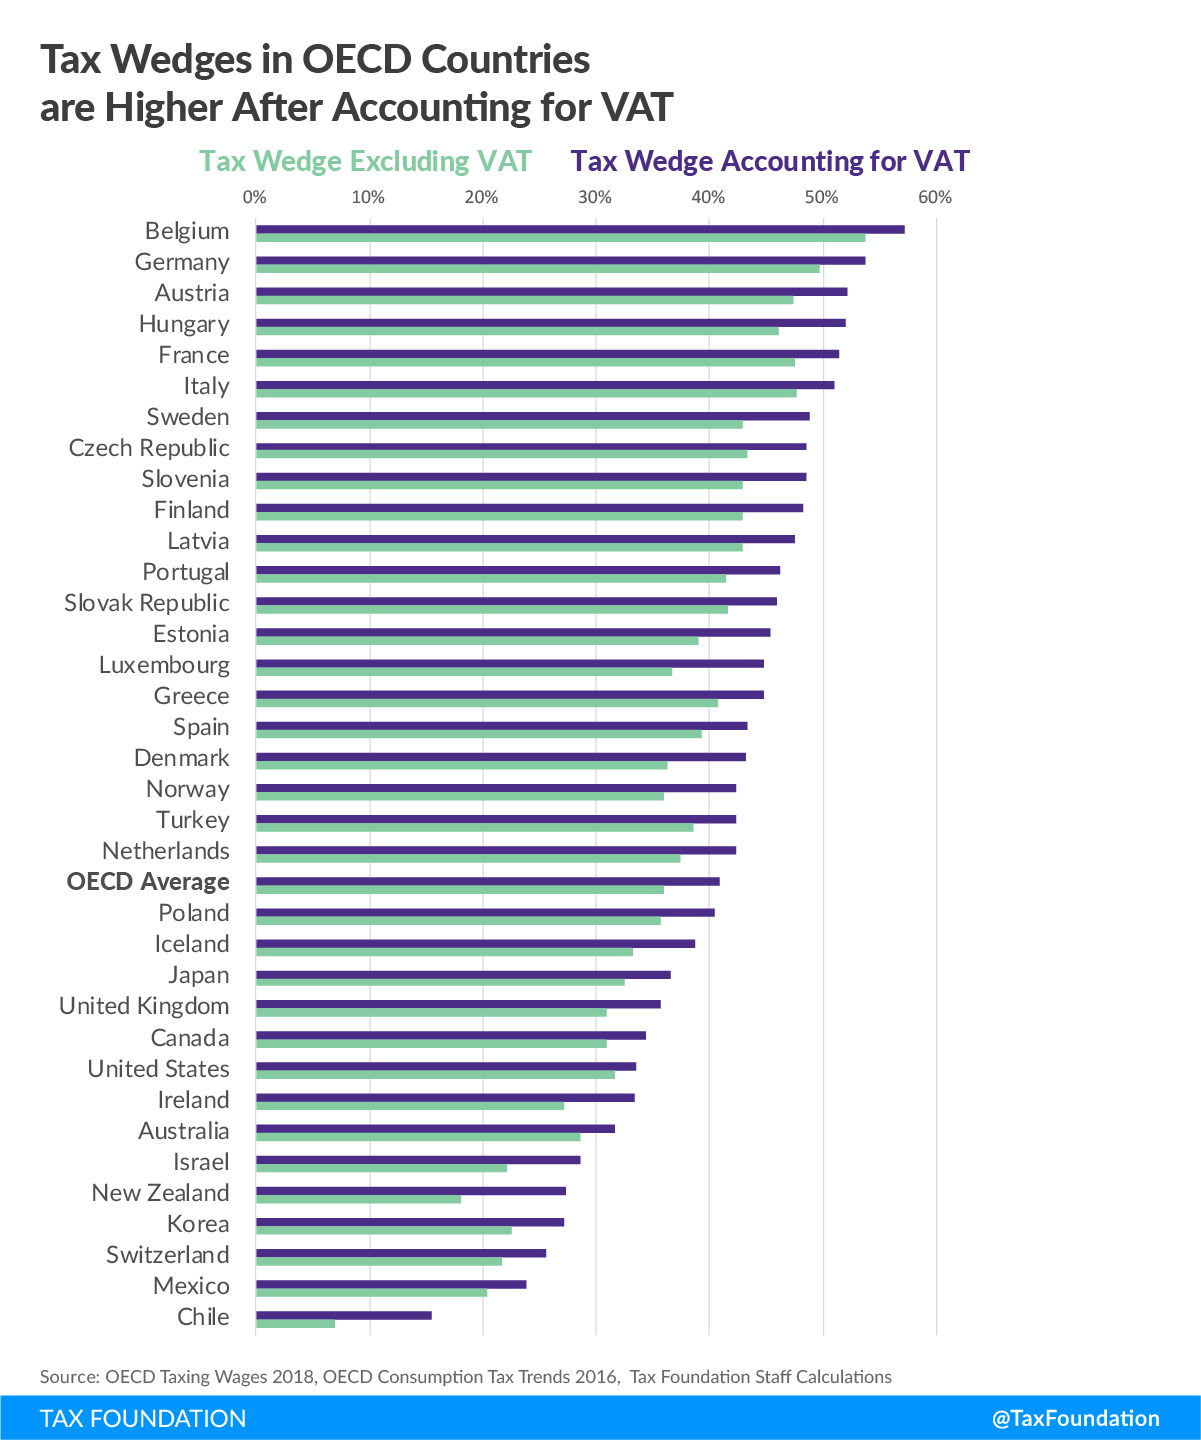 Tax Wedges in OECD Countries are Higher After Accounting for VAT